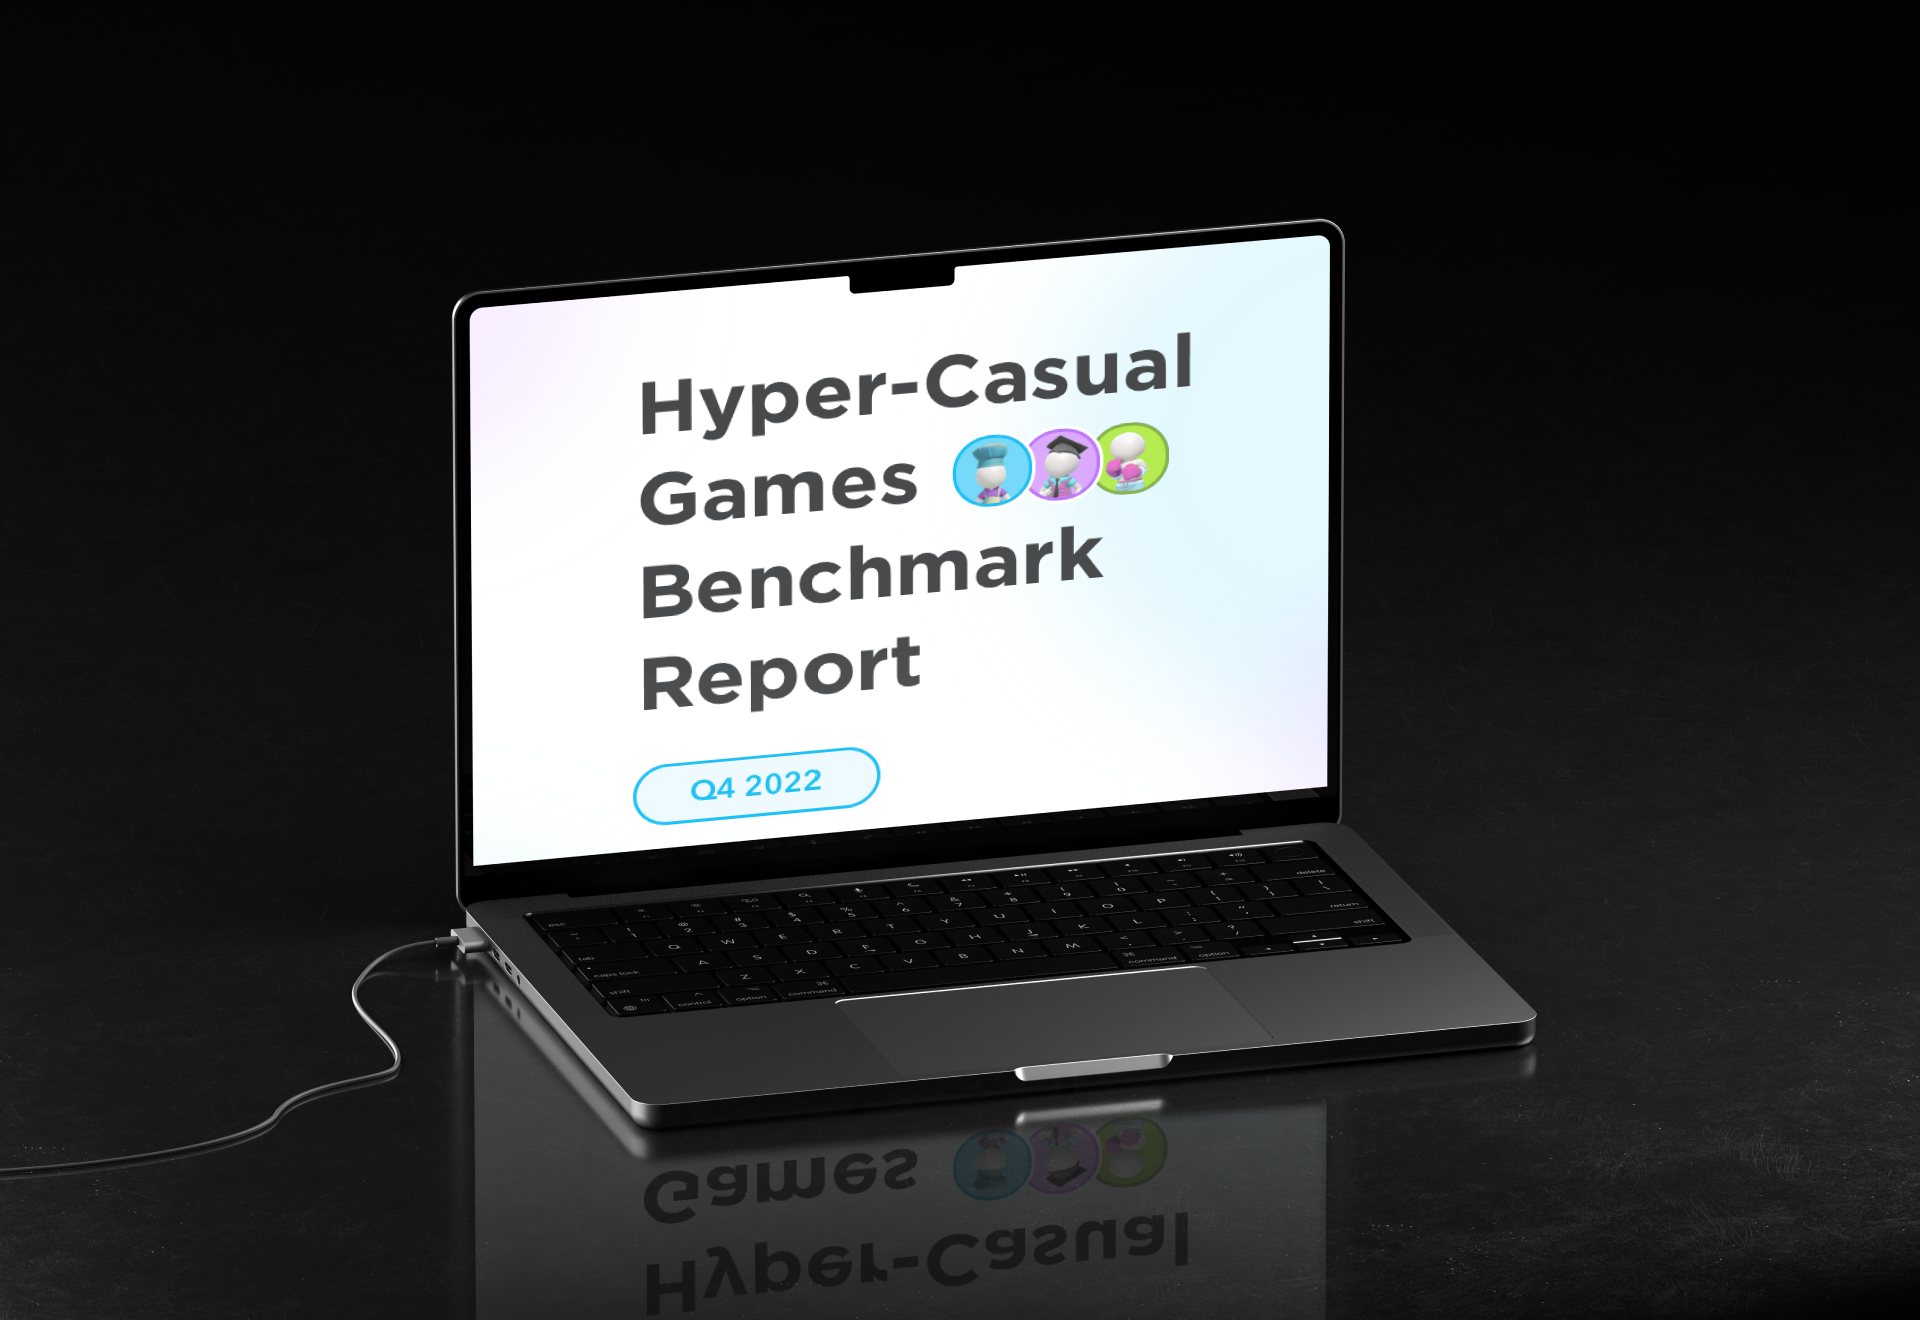 Tenjin releases hyper-casual games benchmark report for Q4 2022